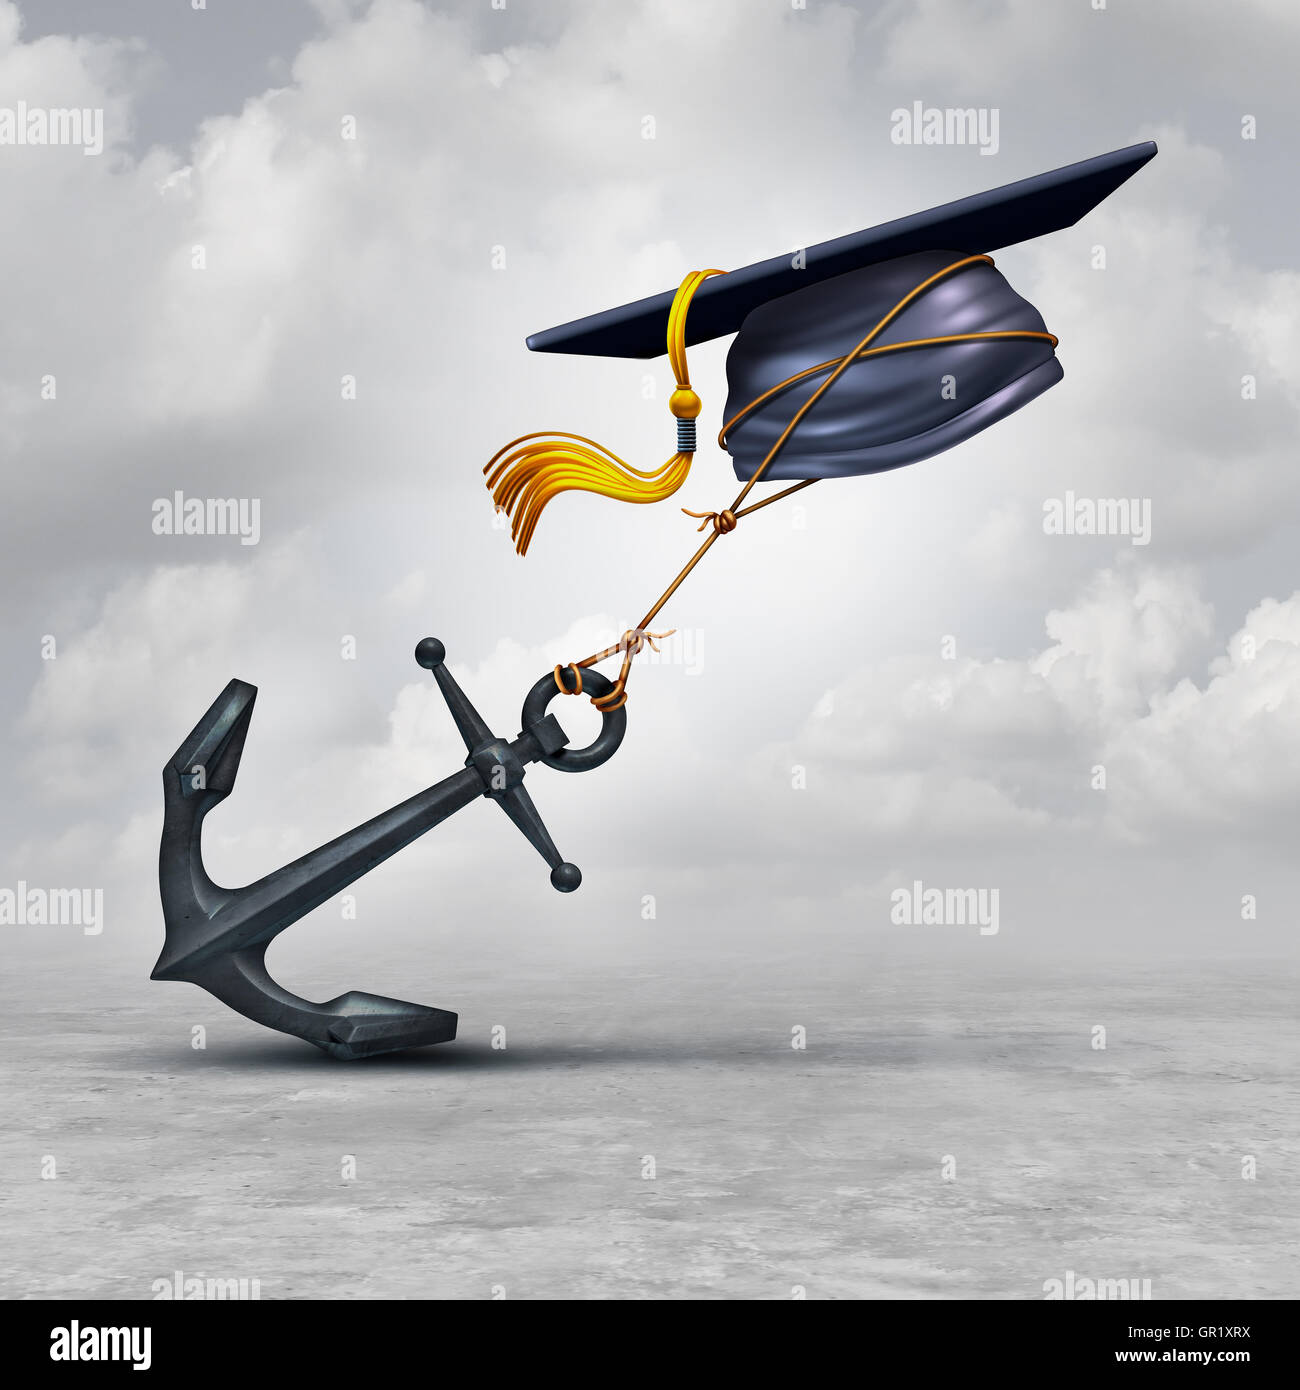 Education problem and learning challenge concept as a mortar cap or graduation hat being held back by a heavy anchor as a educational impairment or school loan burden symbol as a 3D illustration. Stock Photo